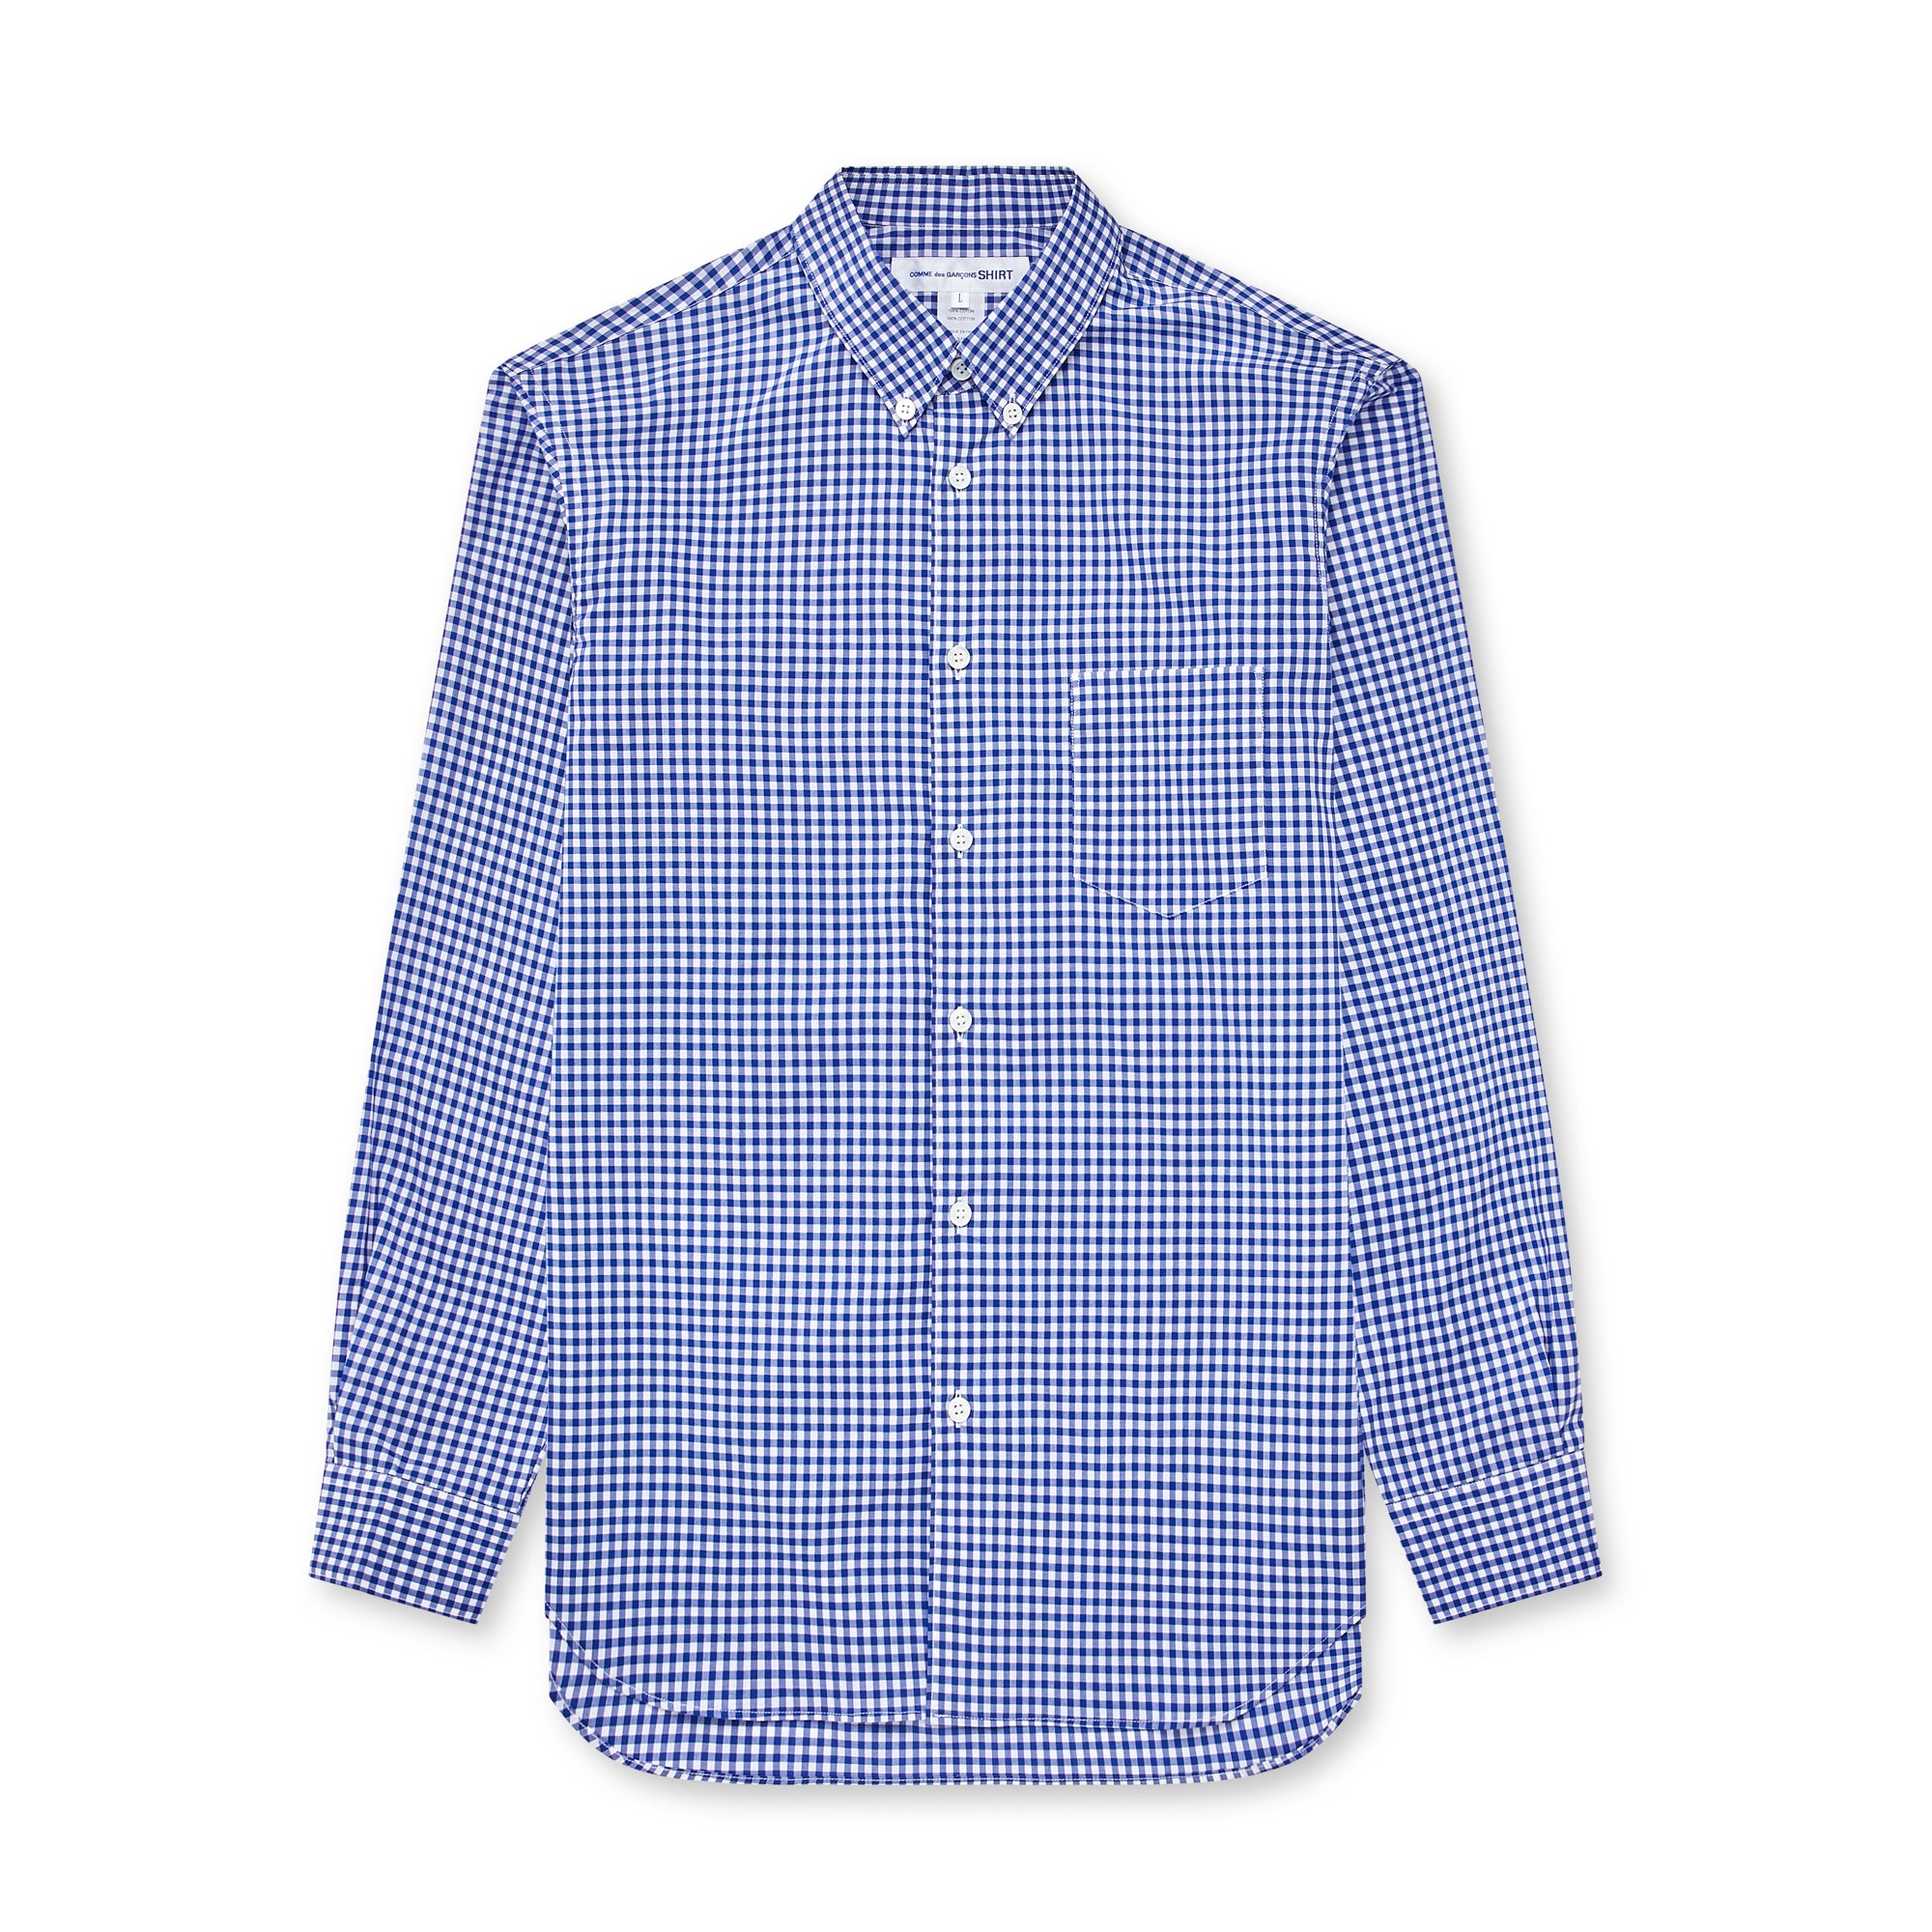 CDG Shirt Forever - Slim Fit Button-Down Checked Shirt - (Blue Gingham) view 5